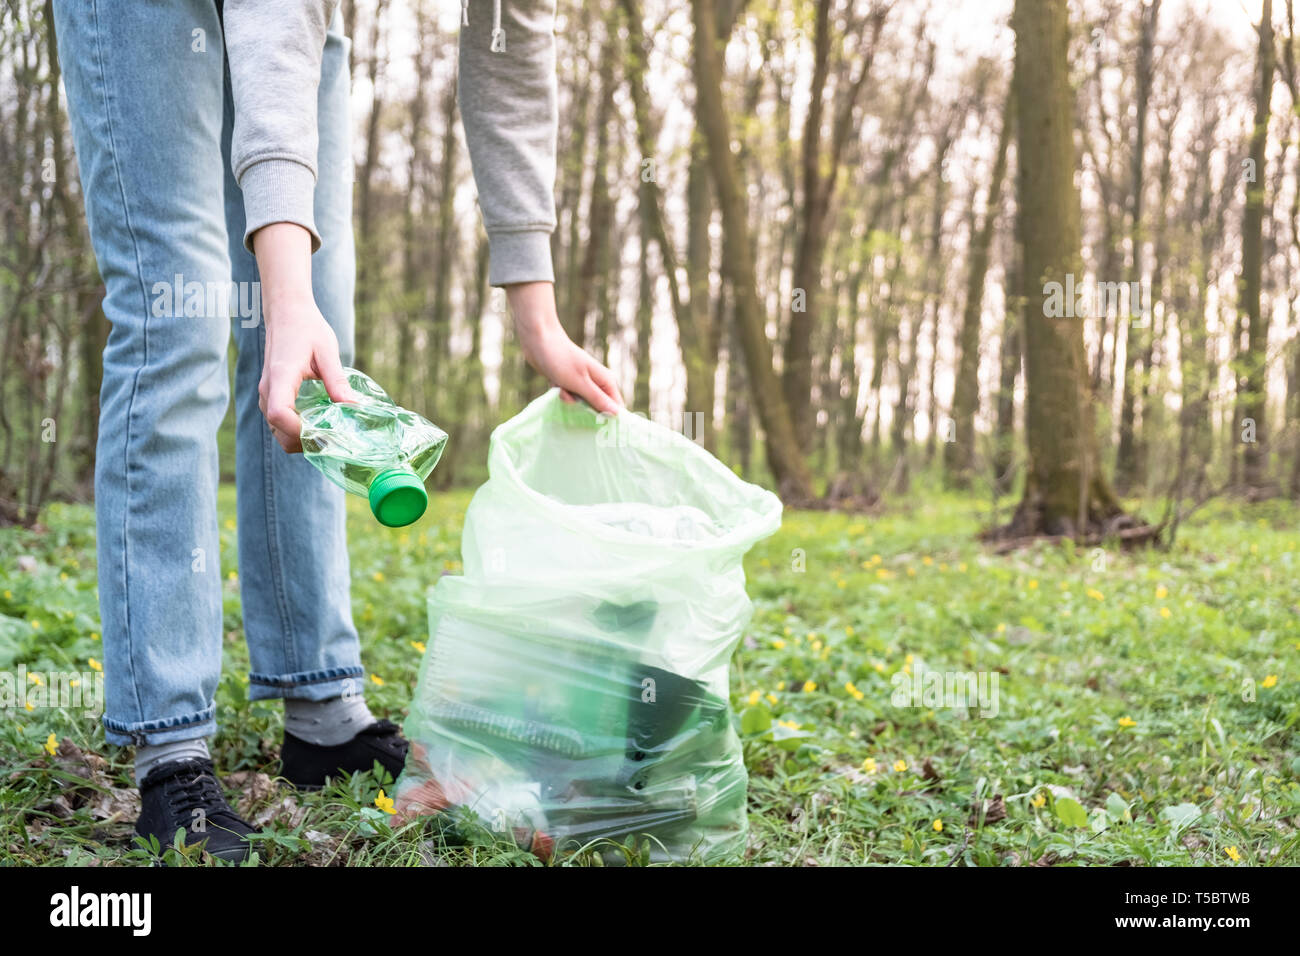 Cleaning-up the forest of plastic garbage. Person picks up a plastic bottle in the woods, concept of plastic awareness activism. Stock Photo